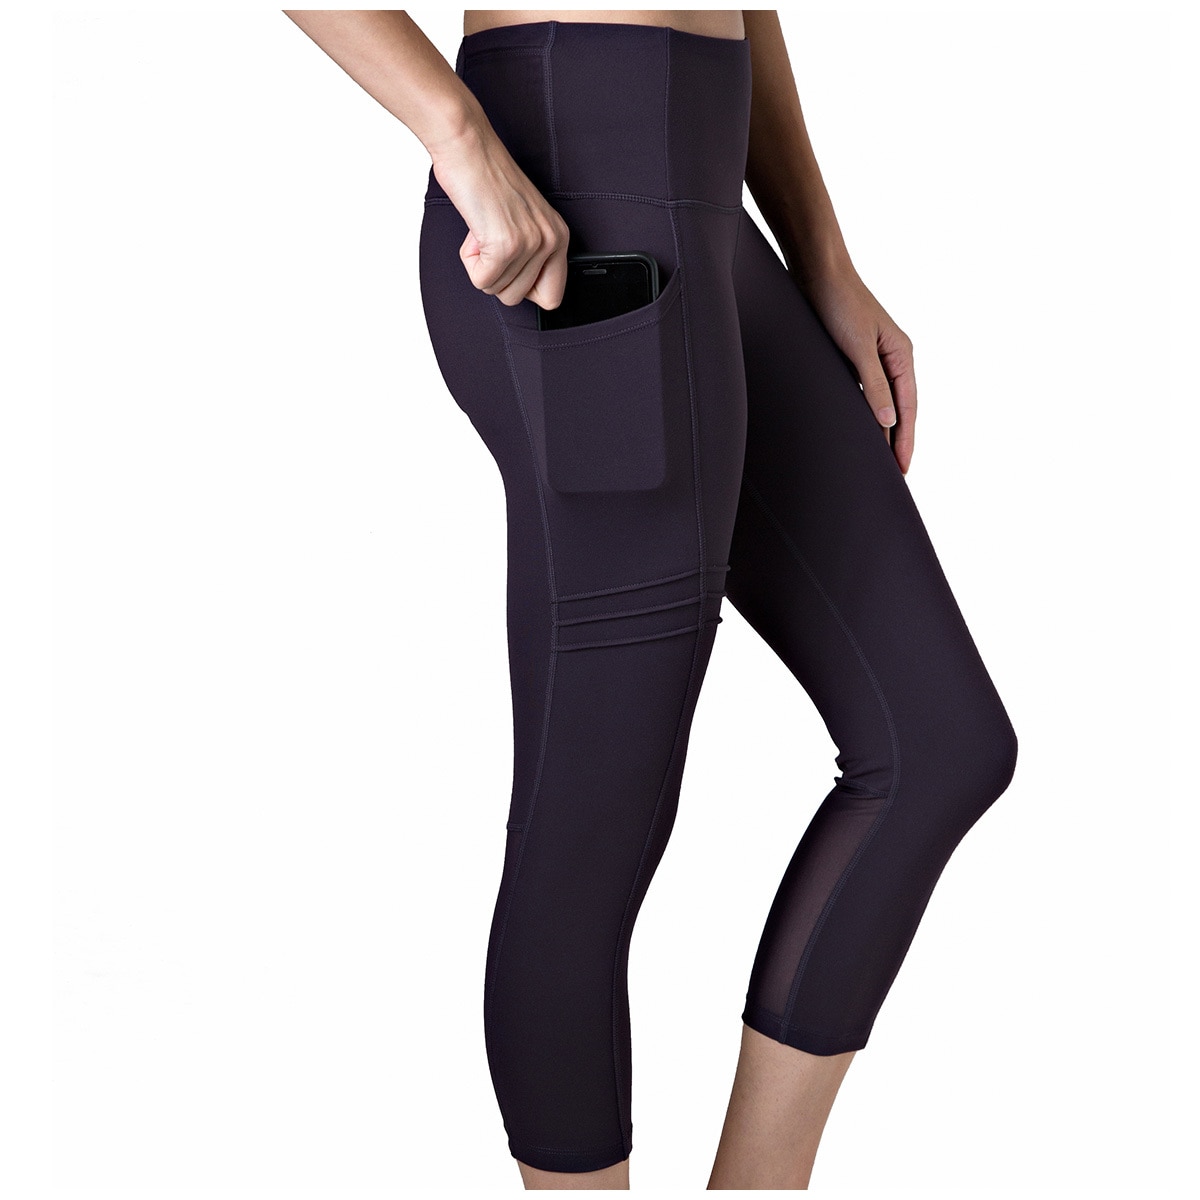 Cute black flared yoga pants with a blue band at the back from Tuff  athletics